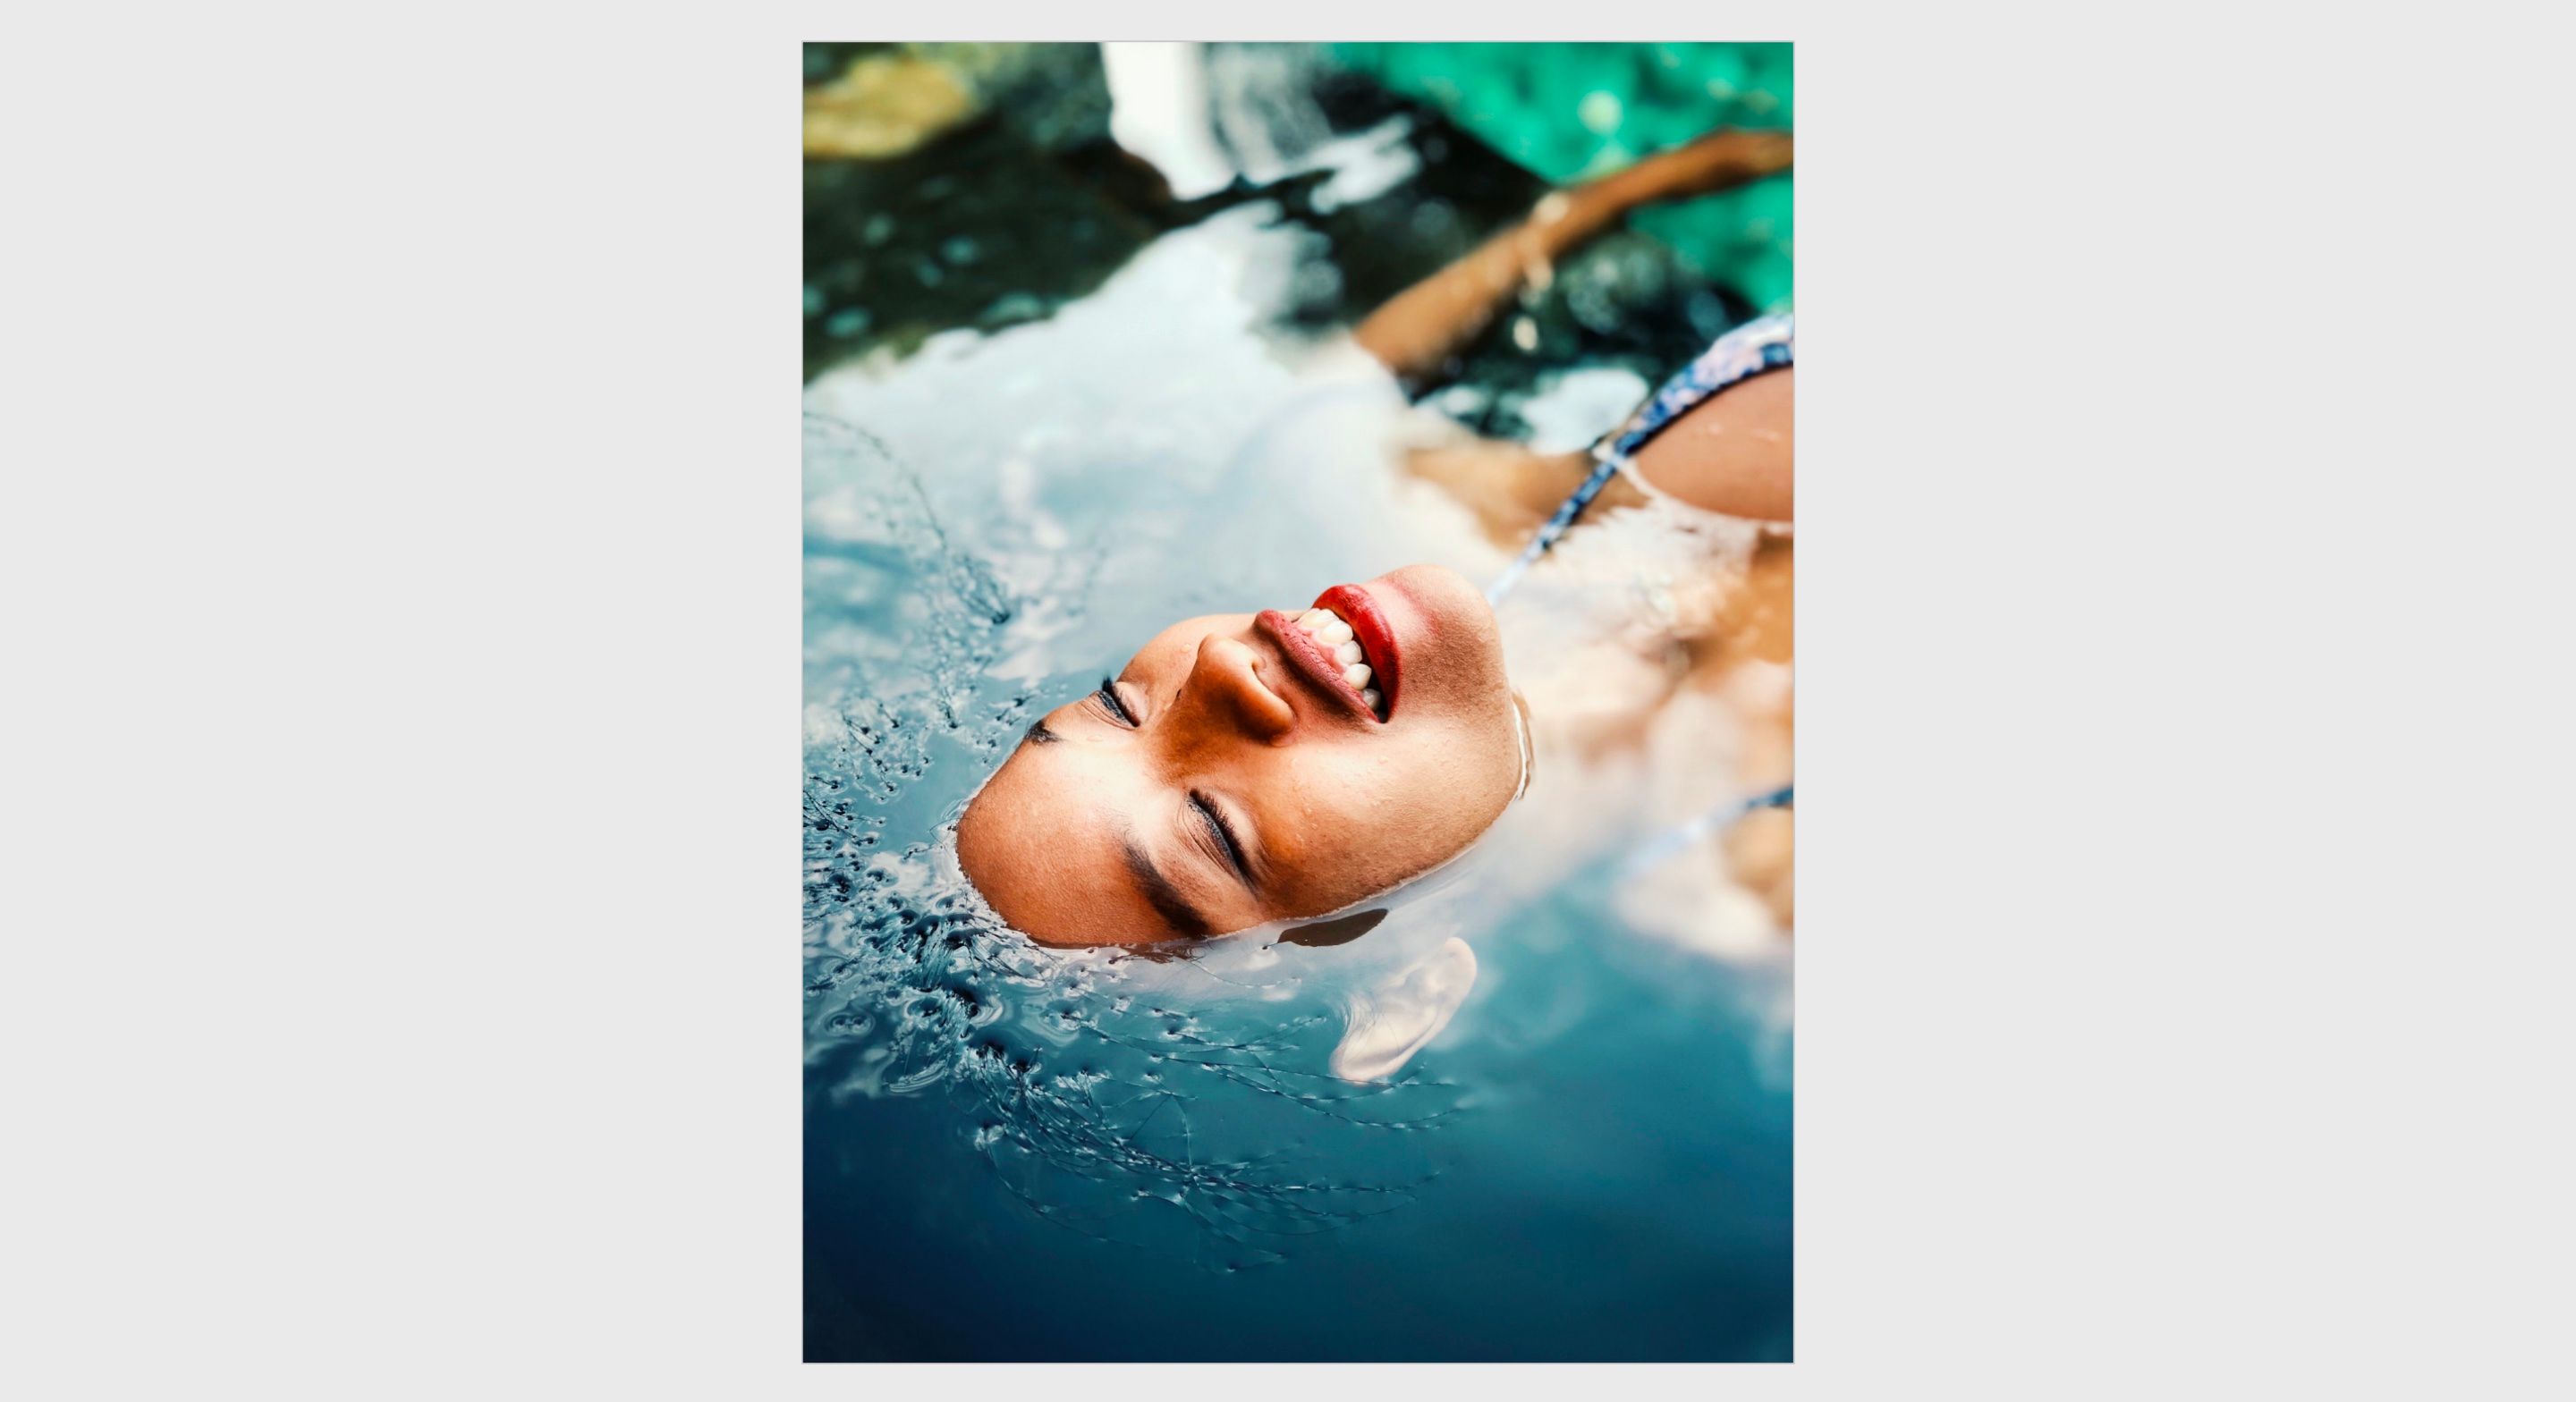 A womans face semi-sumberged in water